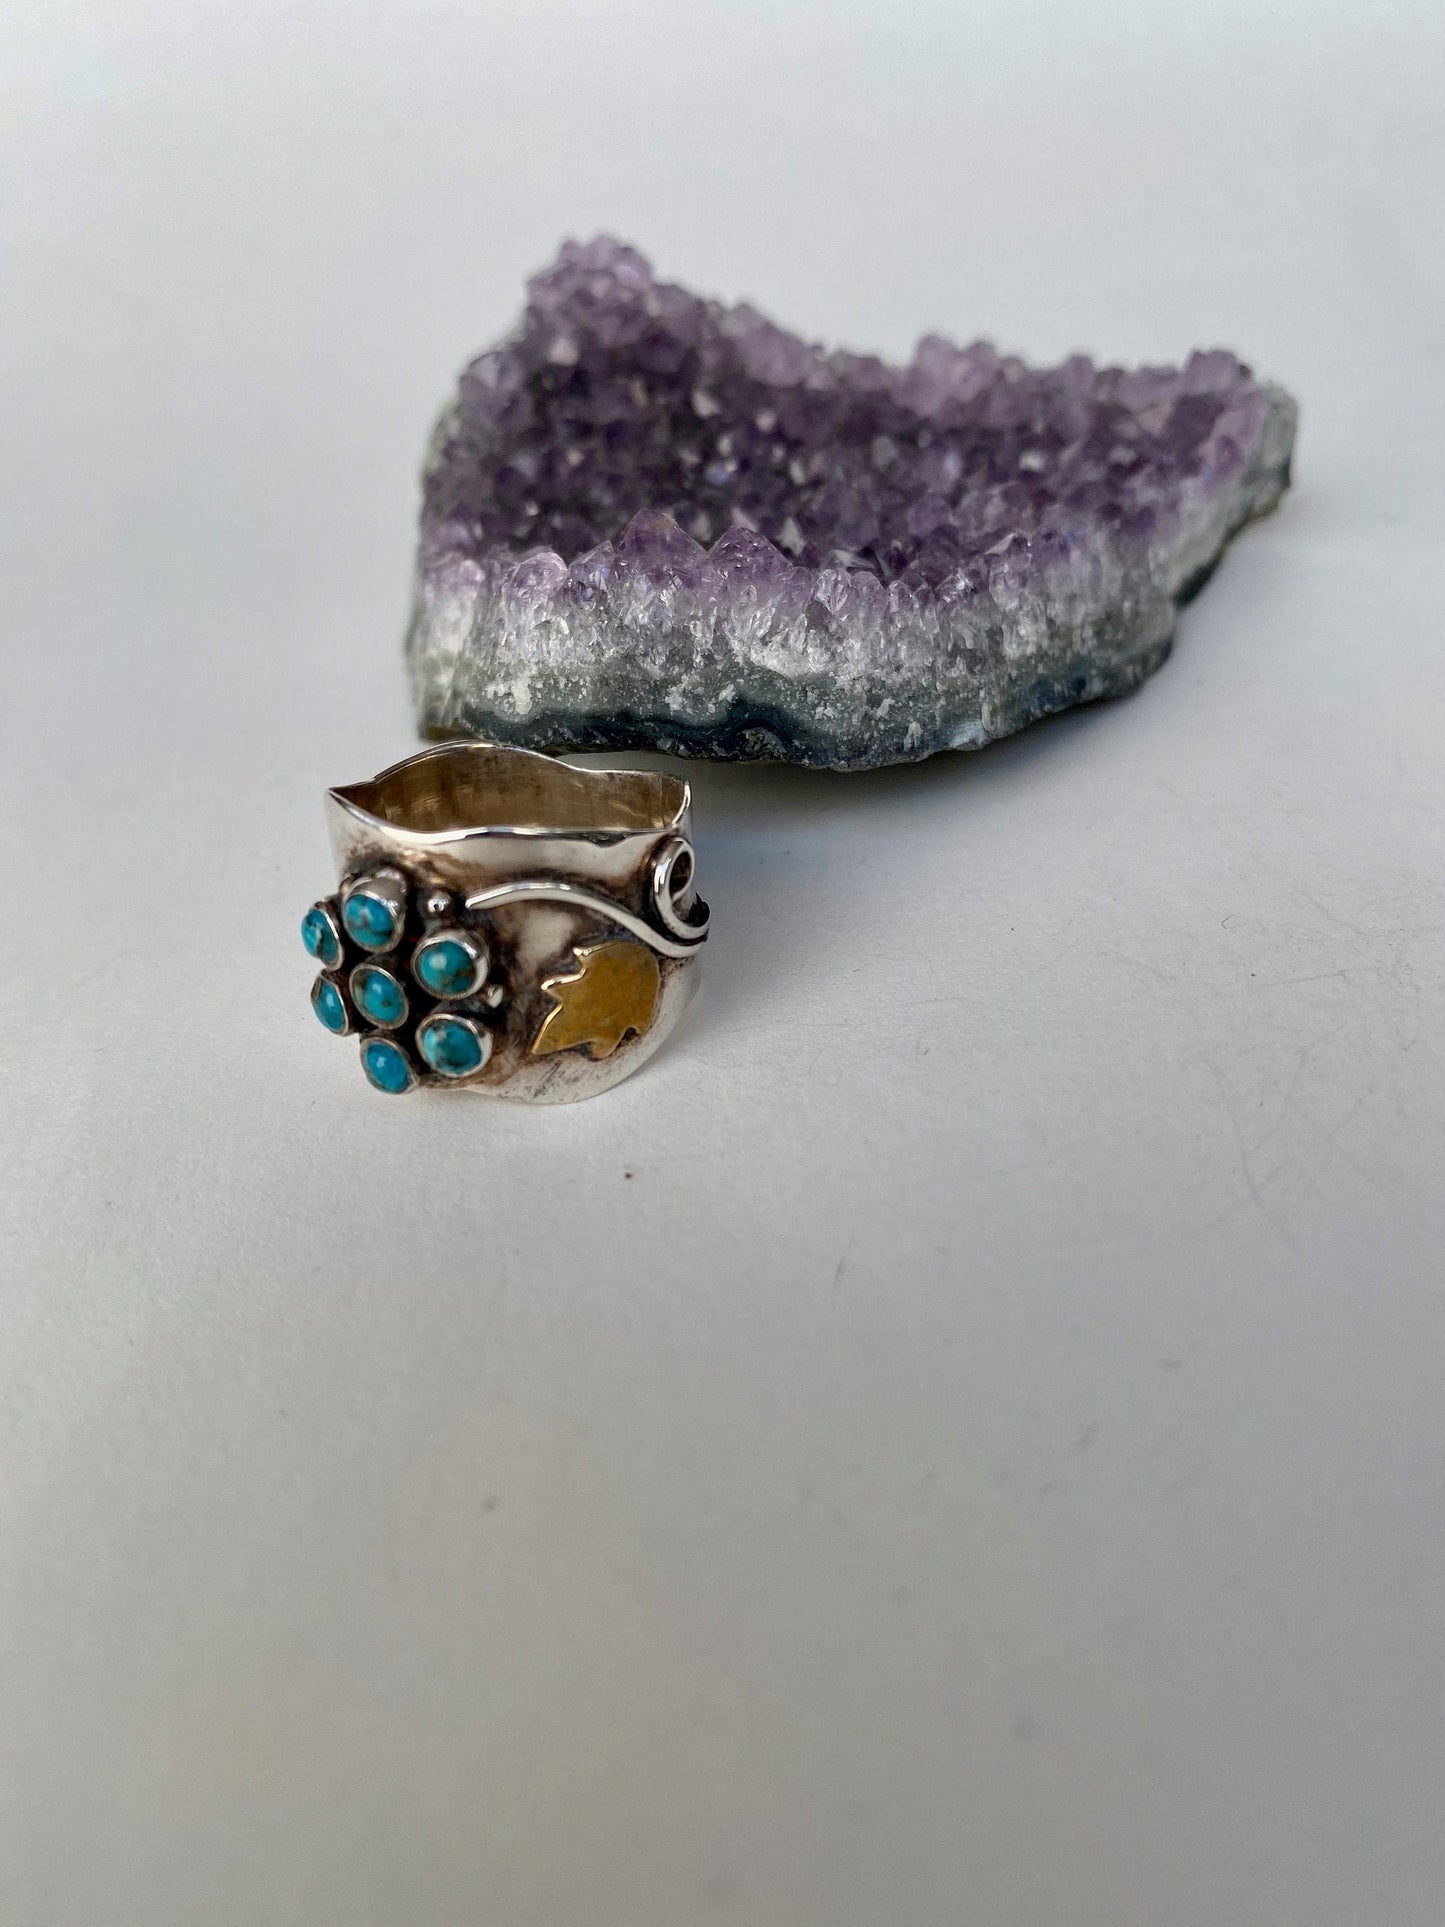 Handmade size 6 1/4 multi turquoise stone,  sterling silver band with gold accents.